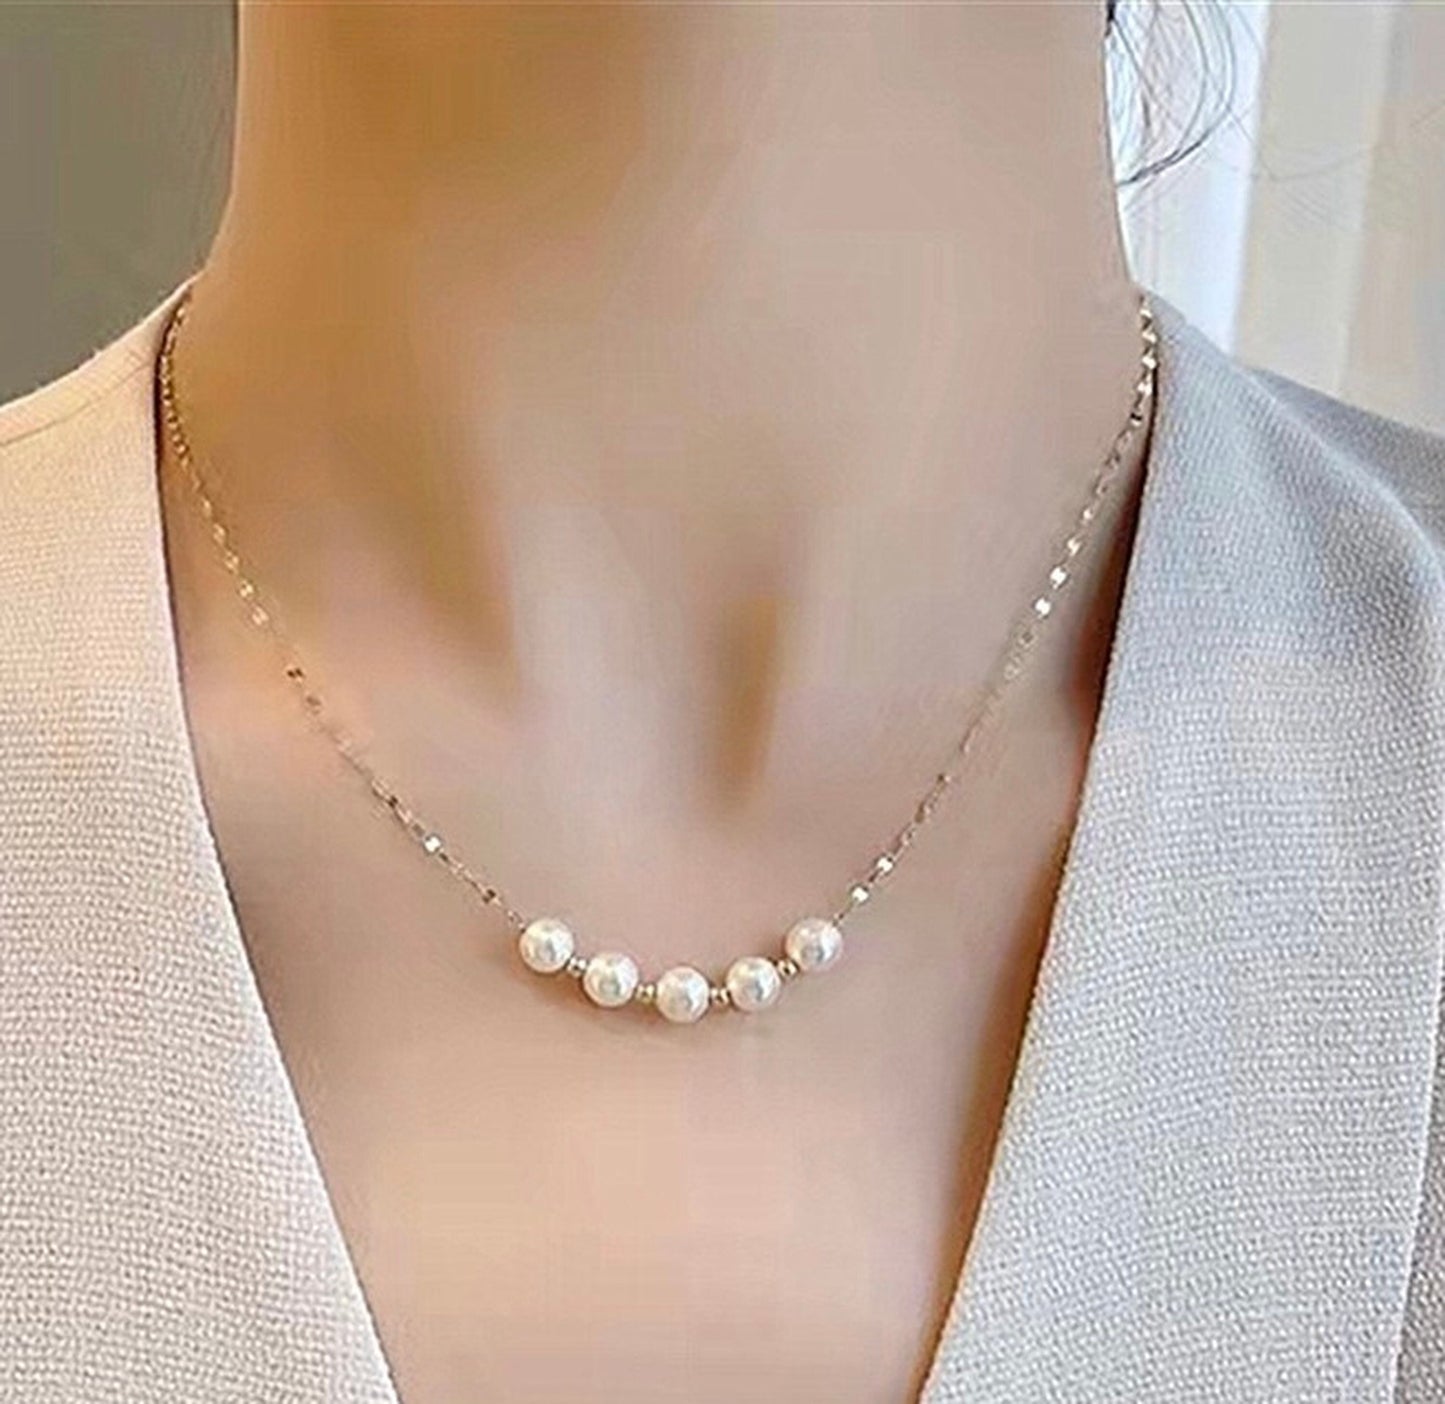 Natural Freshwater Pearl Layered Necklace, 14K Gold Curved Bar Chain Necklace, Minimalist Layer Necklace, Dainty Mirror Chain Necklace, Gift